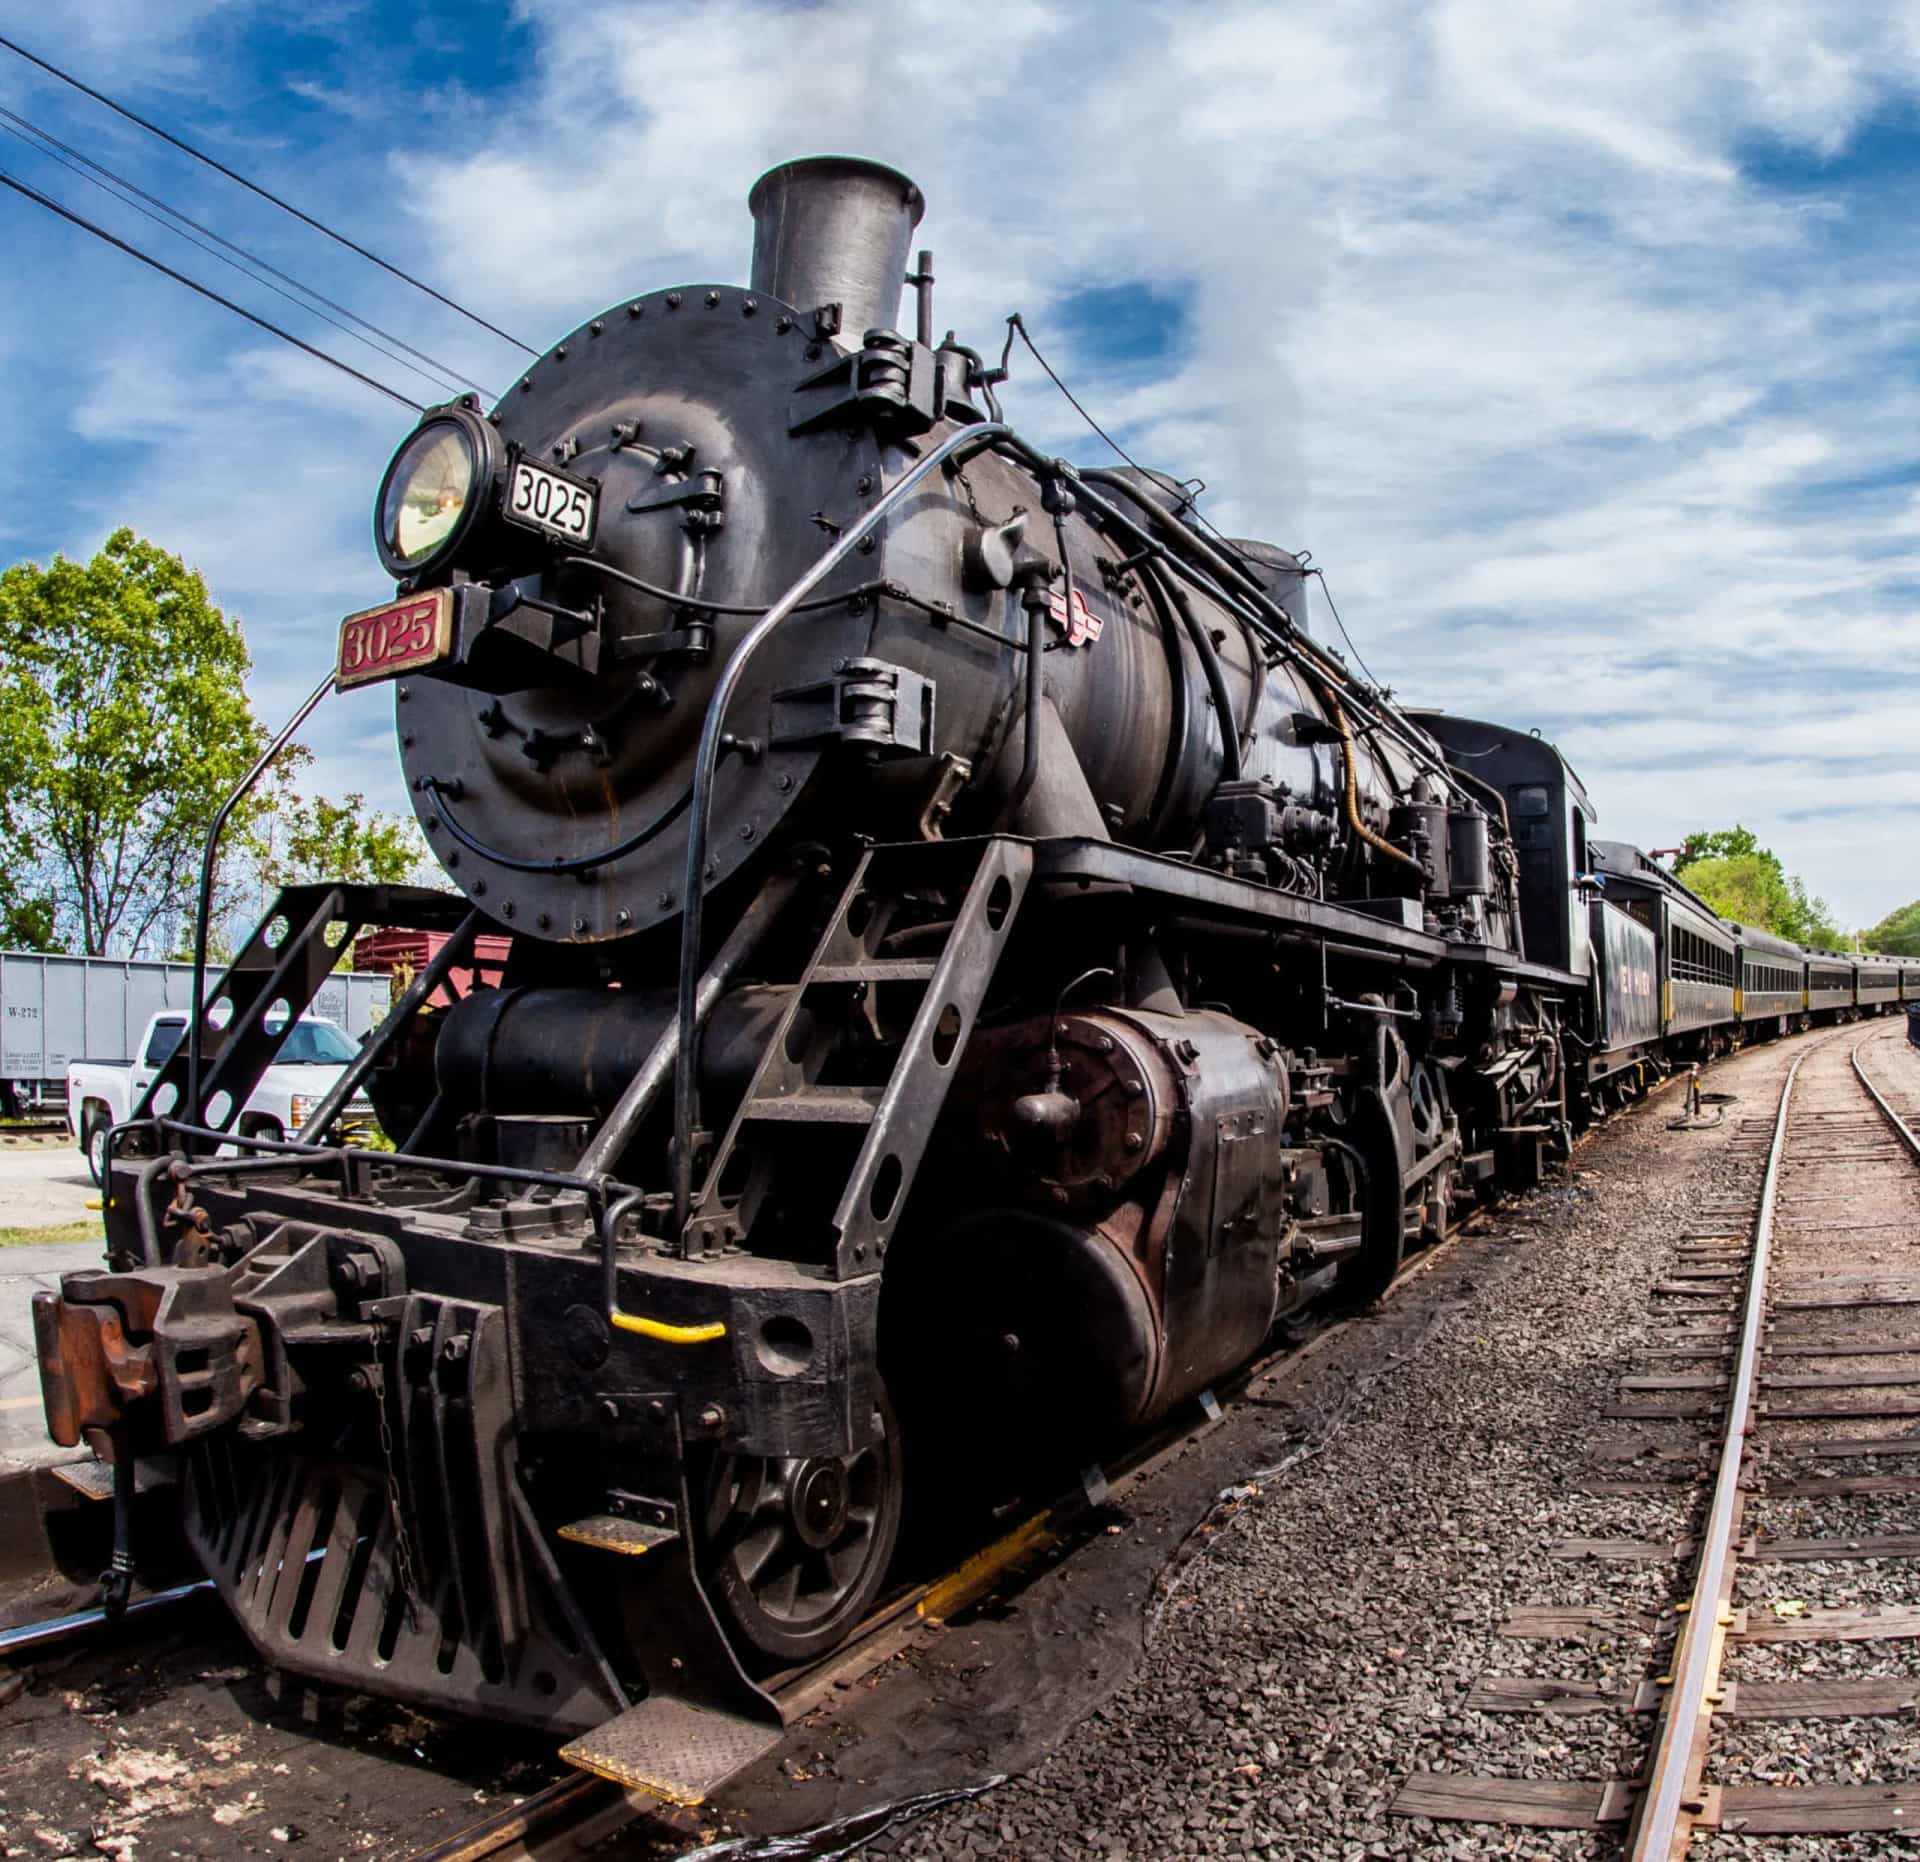 <p>The Connecticut Valley Heritage Railroad operates out of Essex, the vintage locomotives pulling passenger cars through the picturesque Connecticut Valley countryside.</p><p>You may also like: <a href="https://www.starsinsider.com/n/490701?utm_source=msn.com&utm_medium=display&utm_campaign=referral_description&utm_content=513982en-us">Superhero movies we all forgot</a></p>